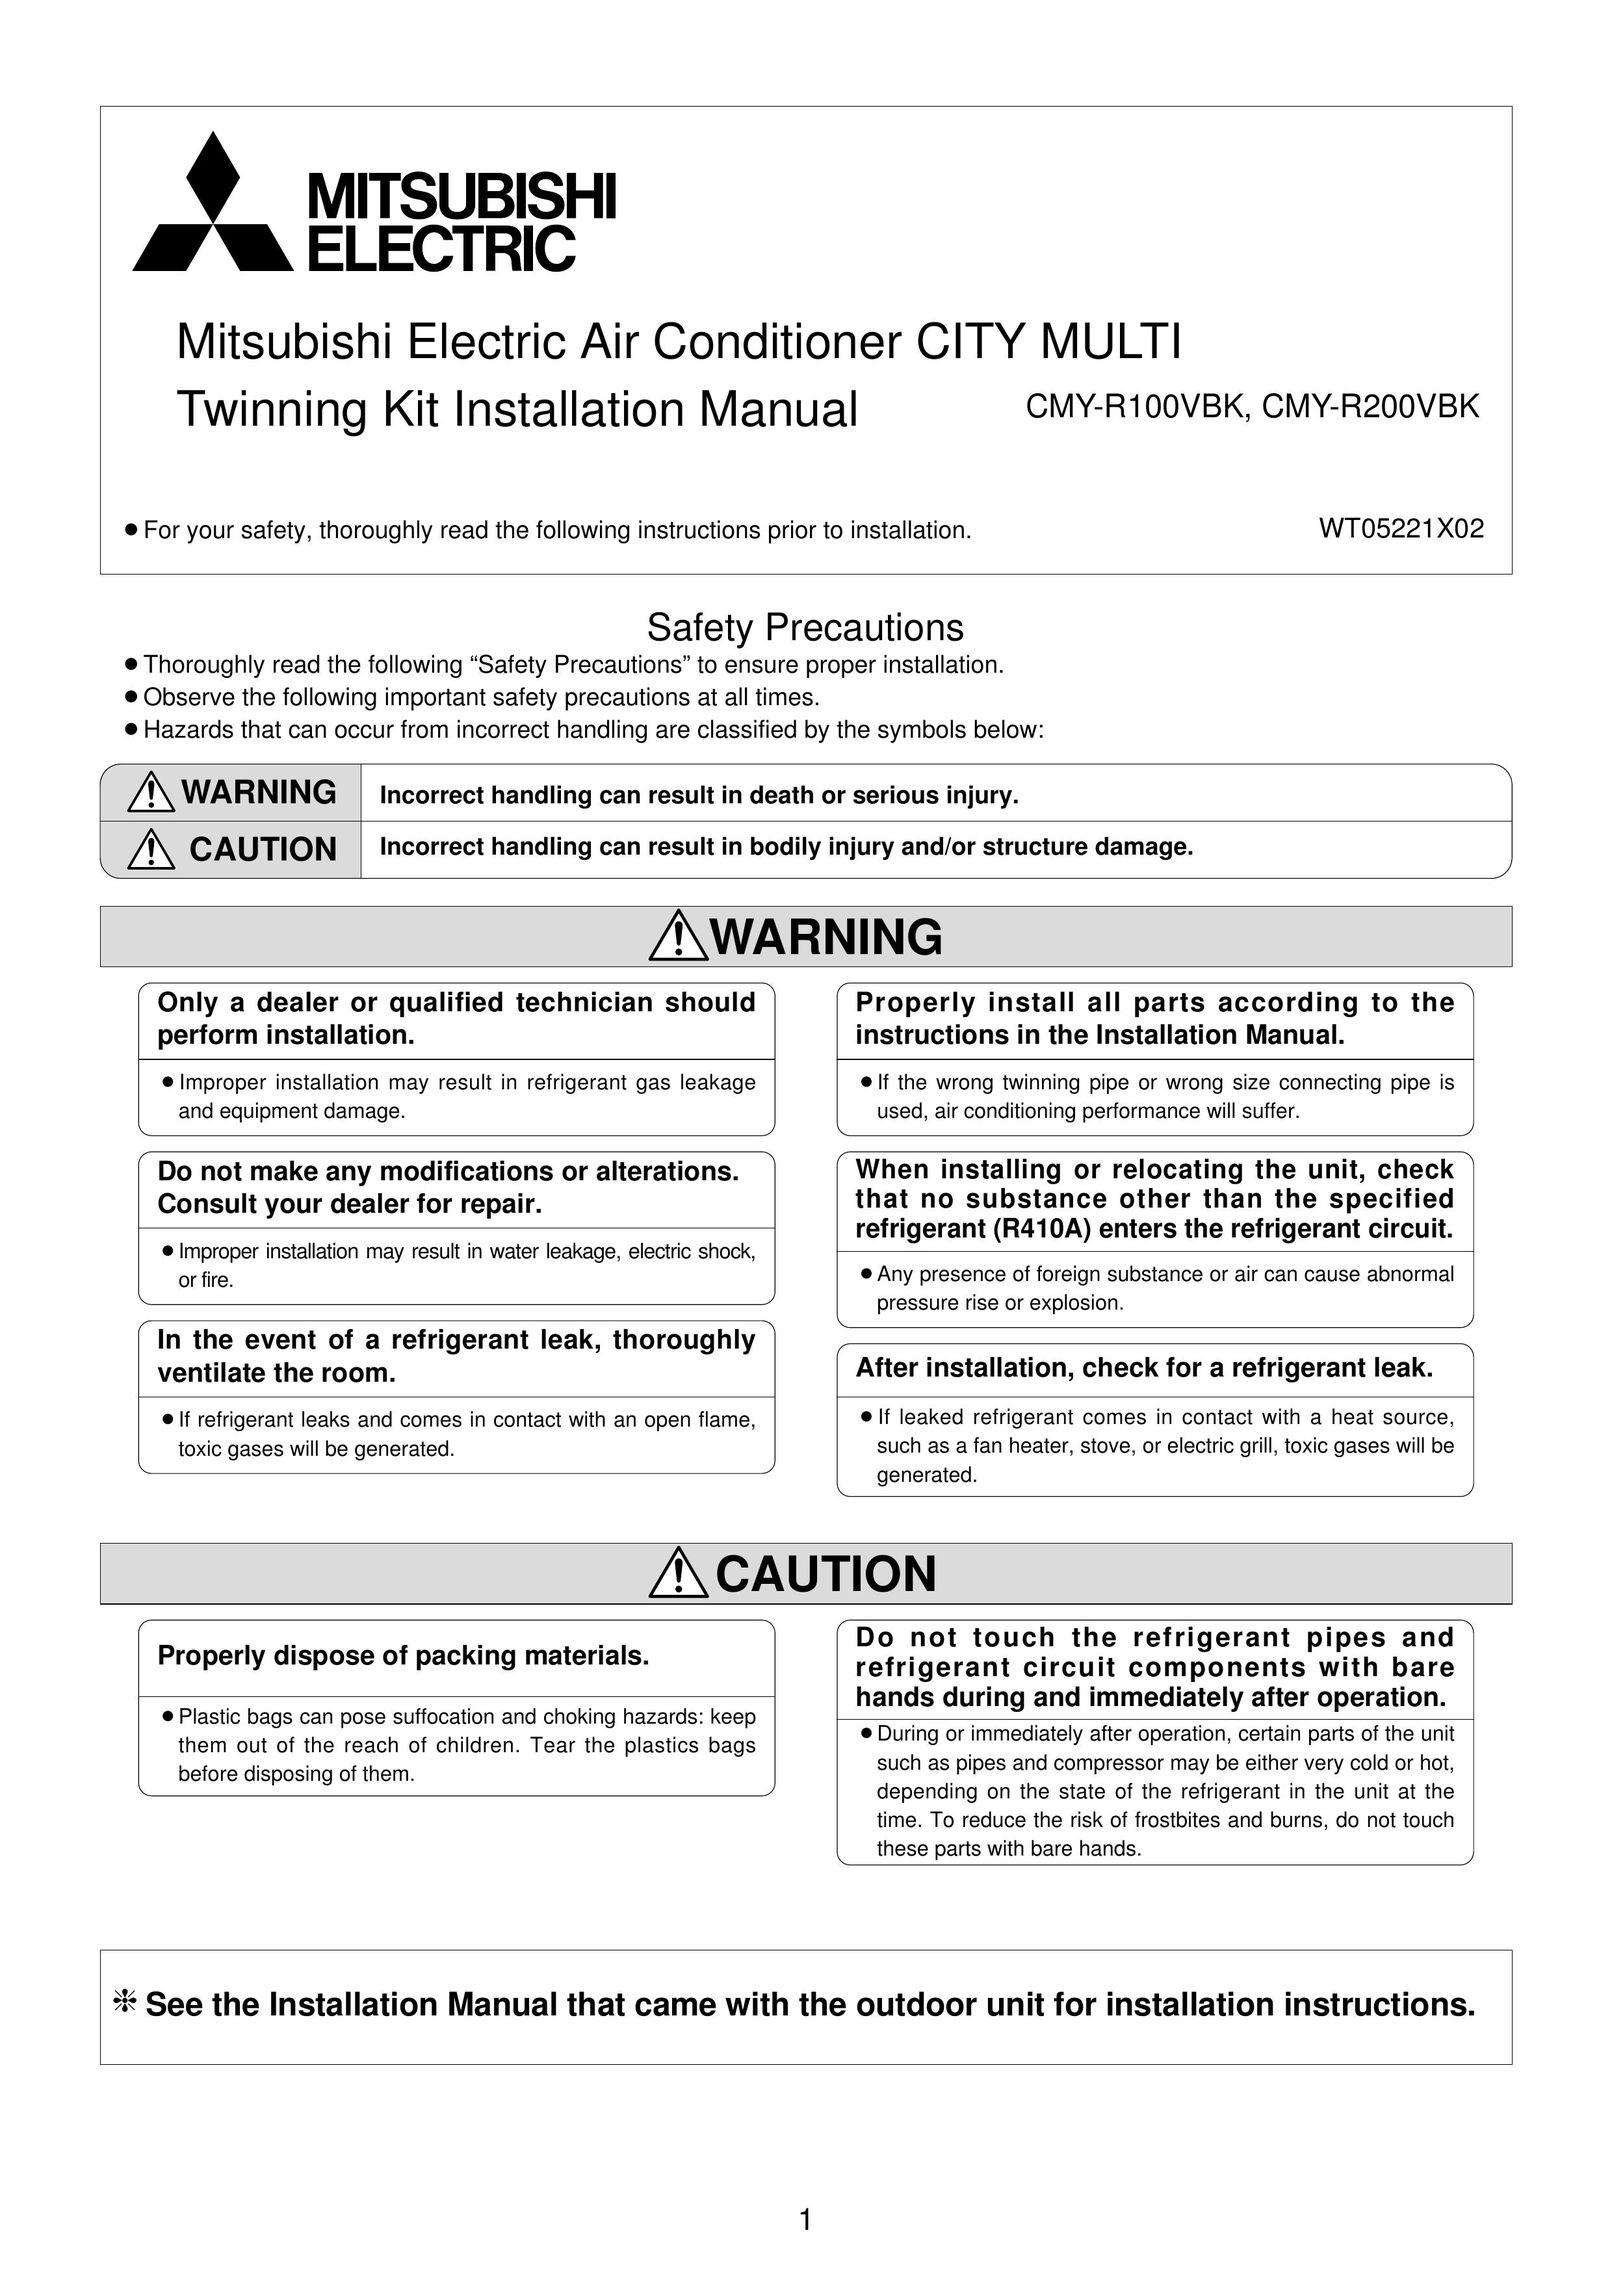 Mitsumi electronic CMY-R200VBK Air Conditioner User Manual